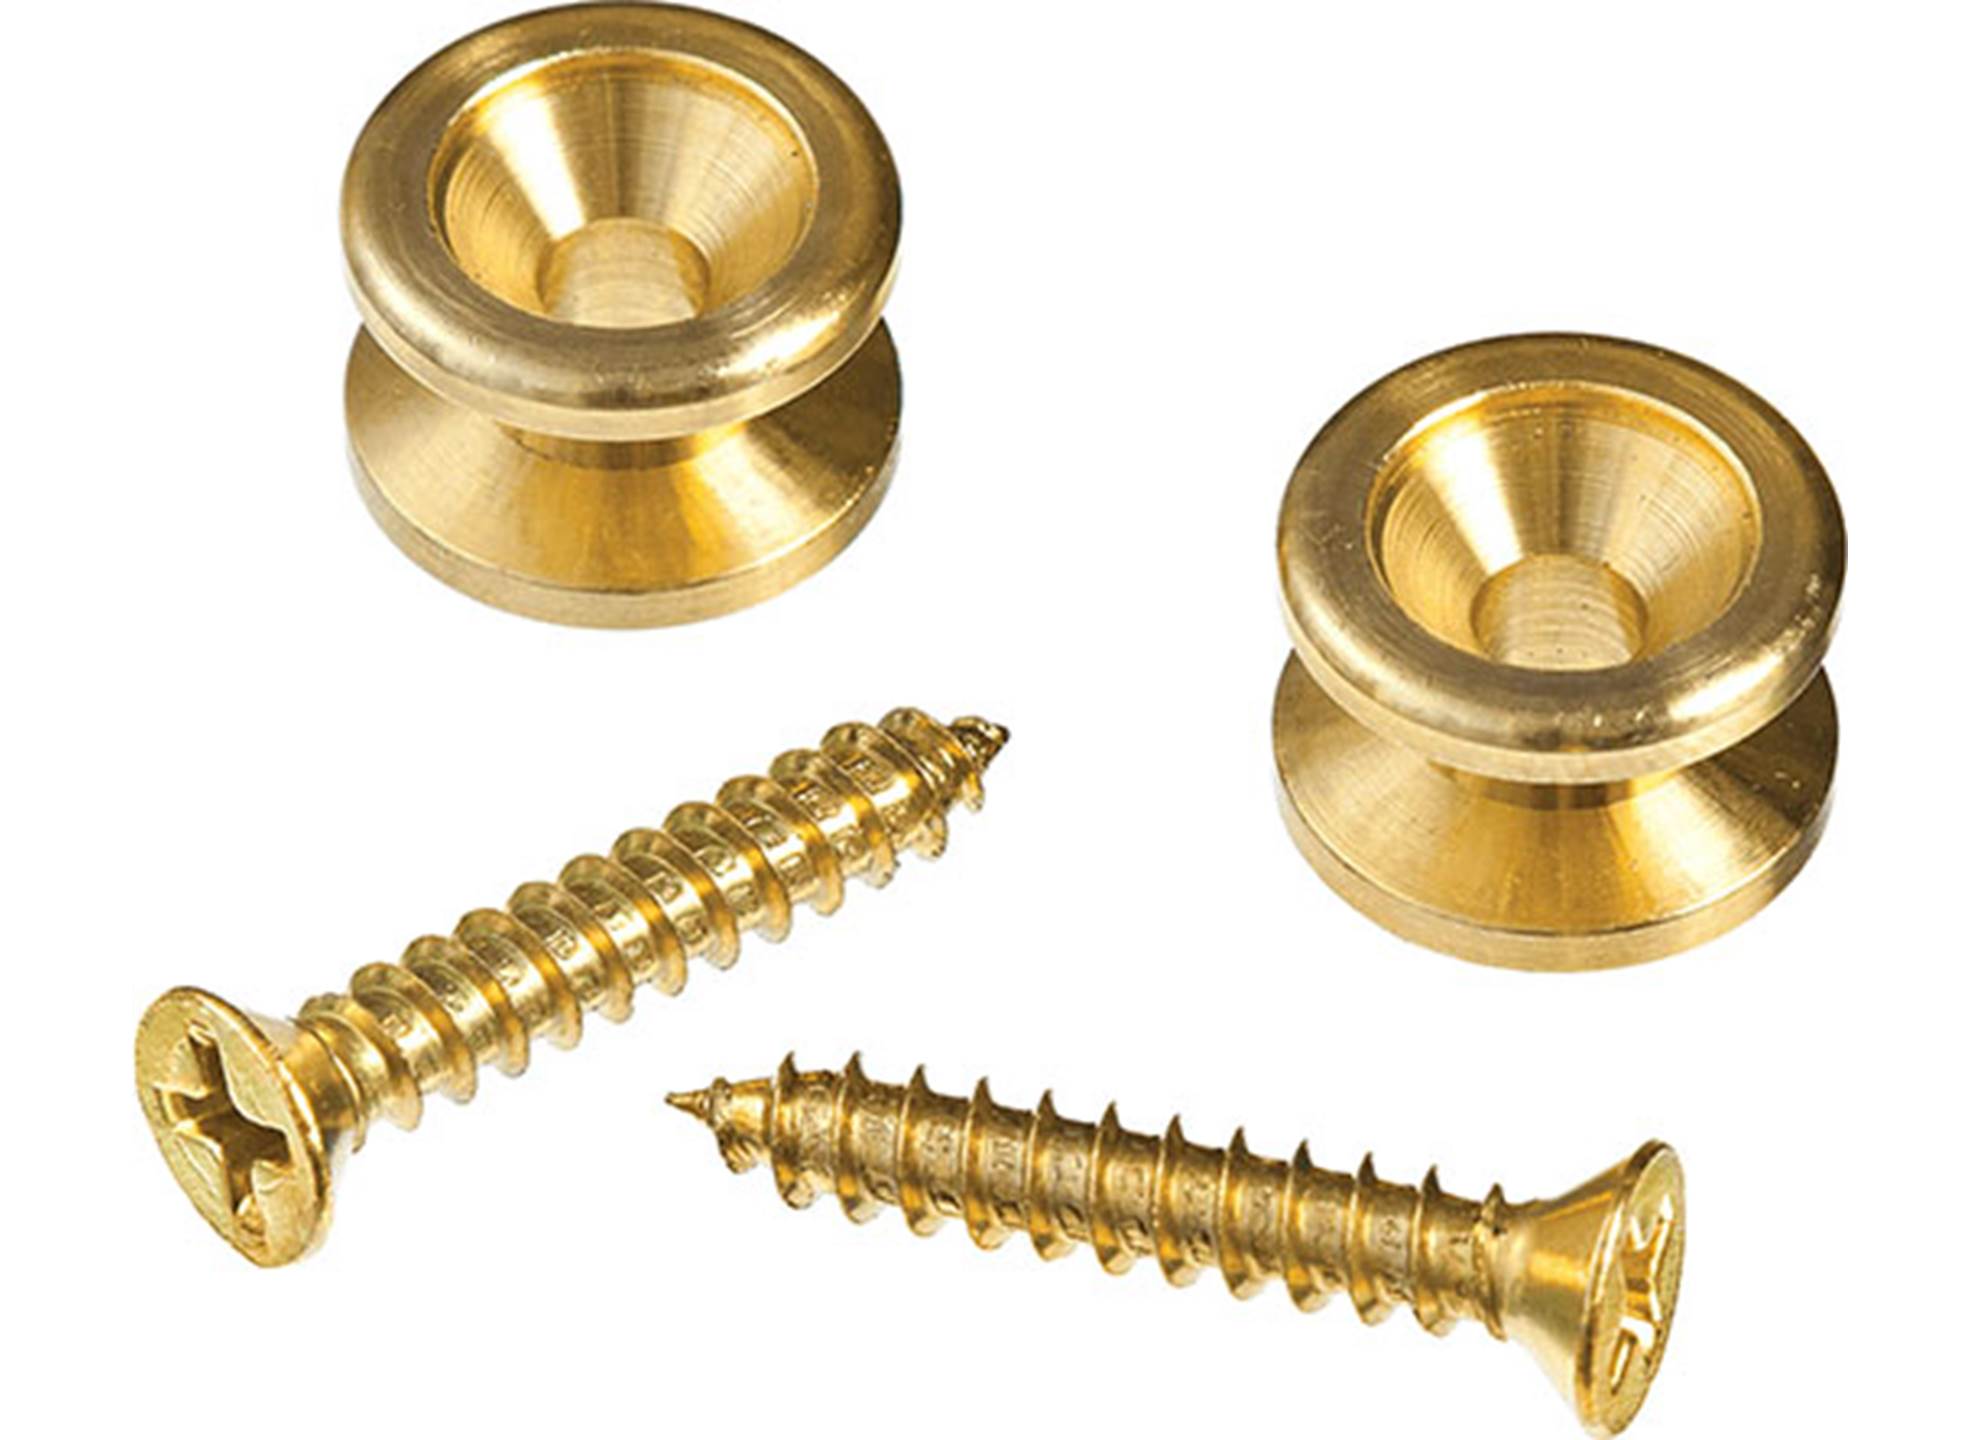 PWEP302 Axelbandshållare Gold 2-pack